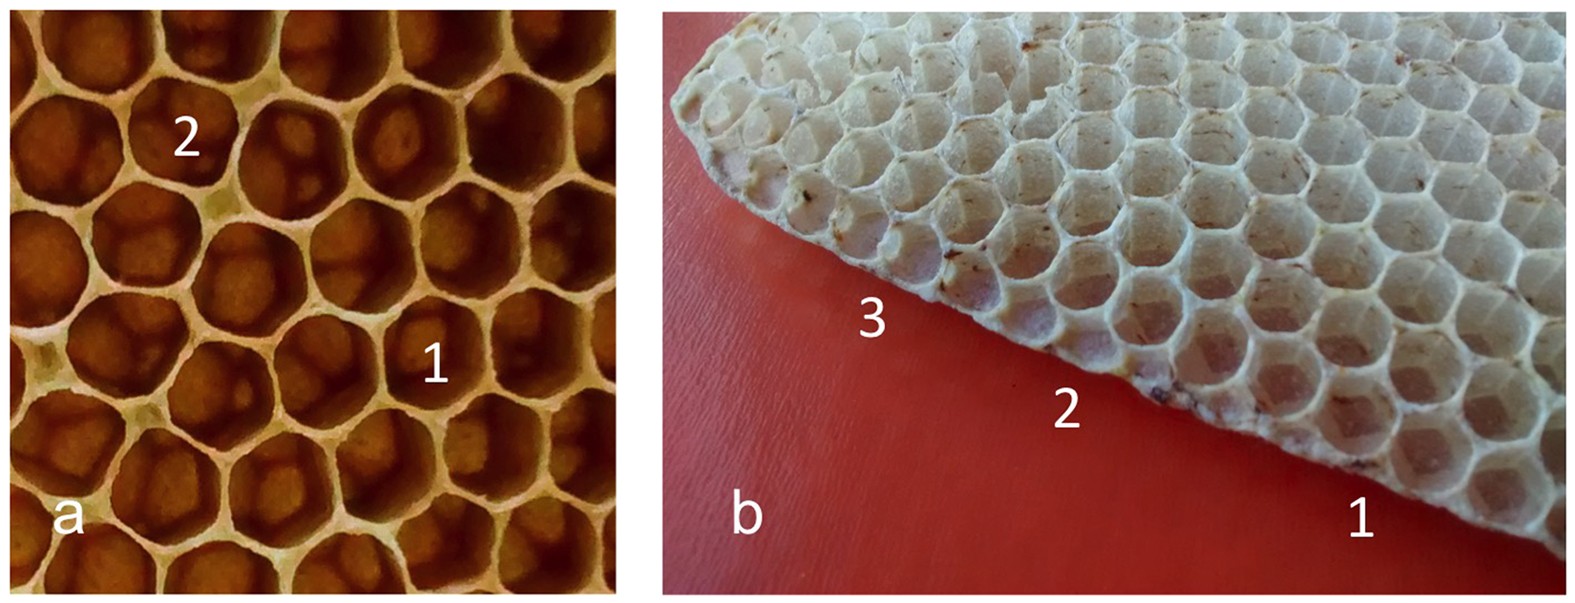 The hexagonal shape of the honeycomb cells depends on the